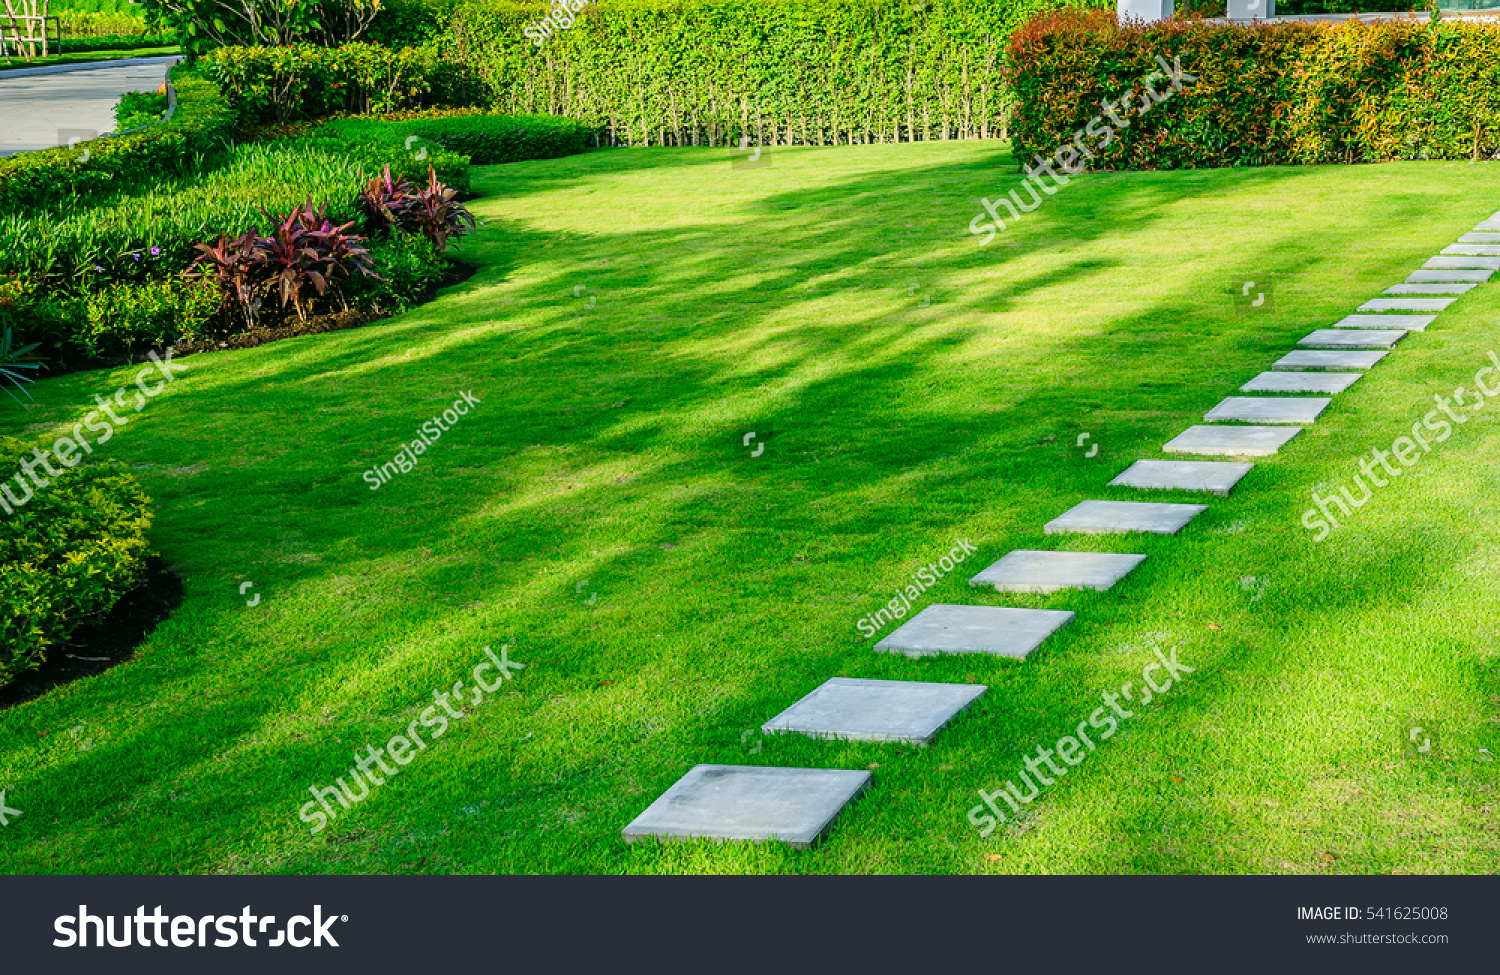 White walkway sheet in the garden, green grass with cement path  Contrasting with the bright green lawns and shrubs, shadows, trees, and morning sun Garden landscape design, lawn care service. #541625008